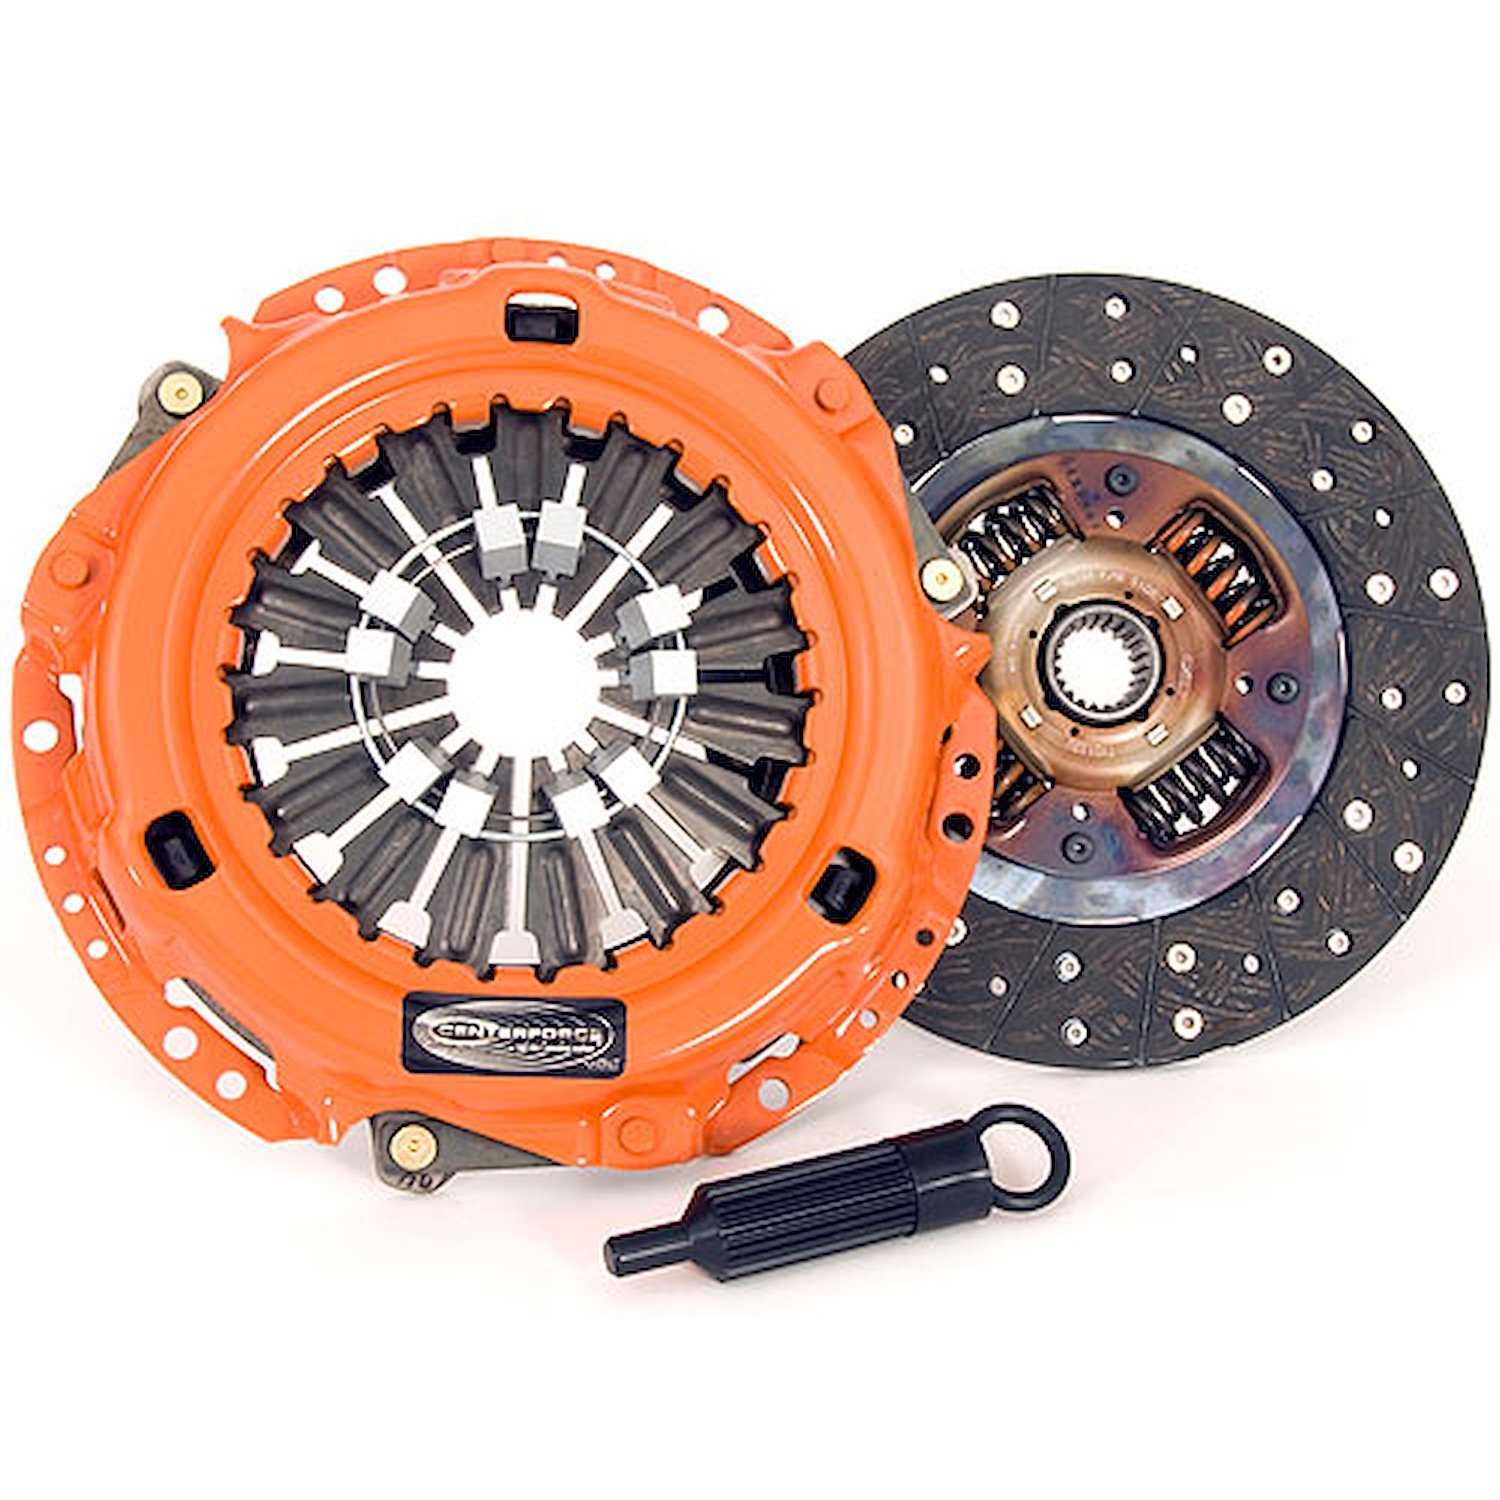 Centerforce II Clutch Kit Includes Pressure Plate, Clutch Disc and Alignment Tool